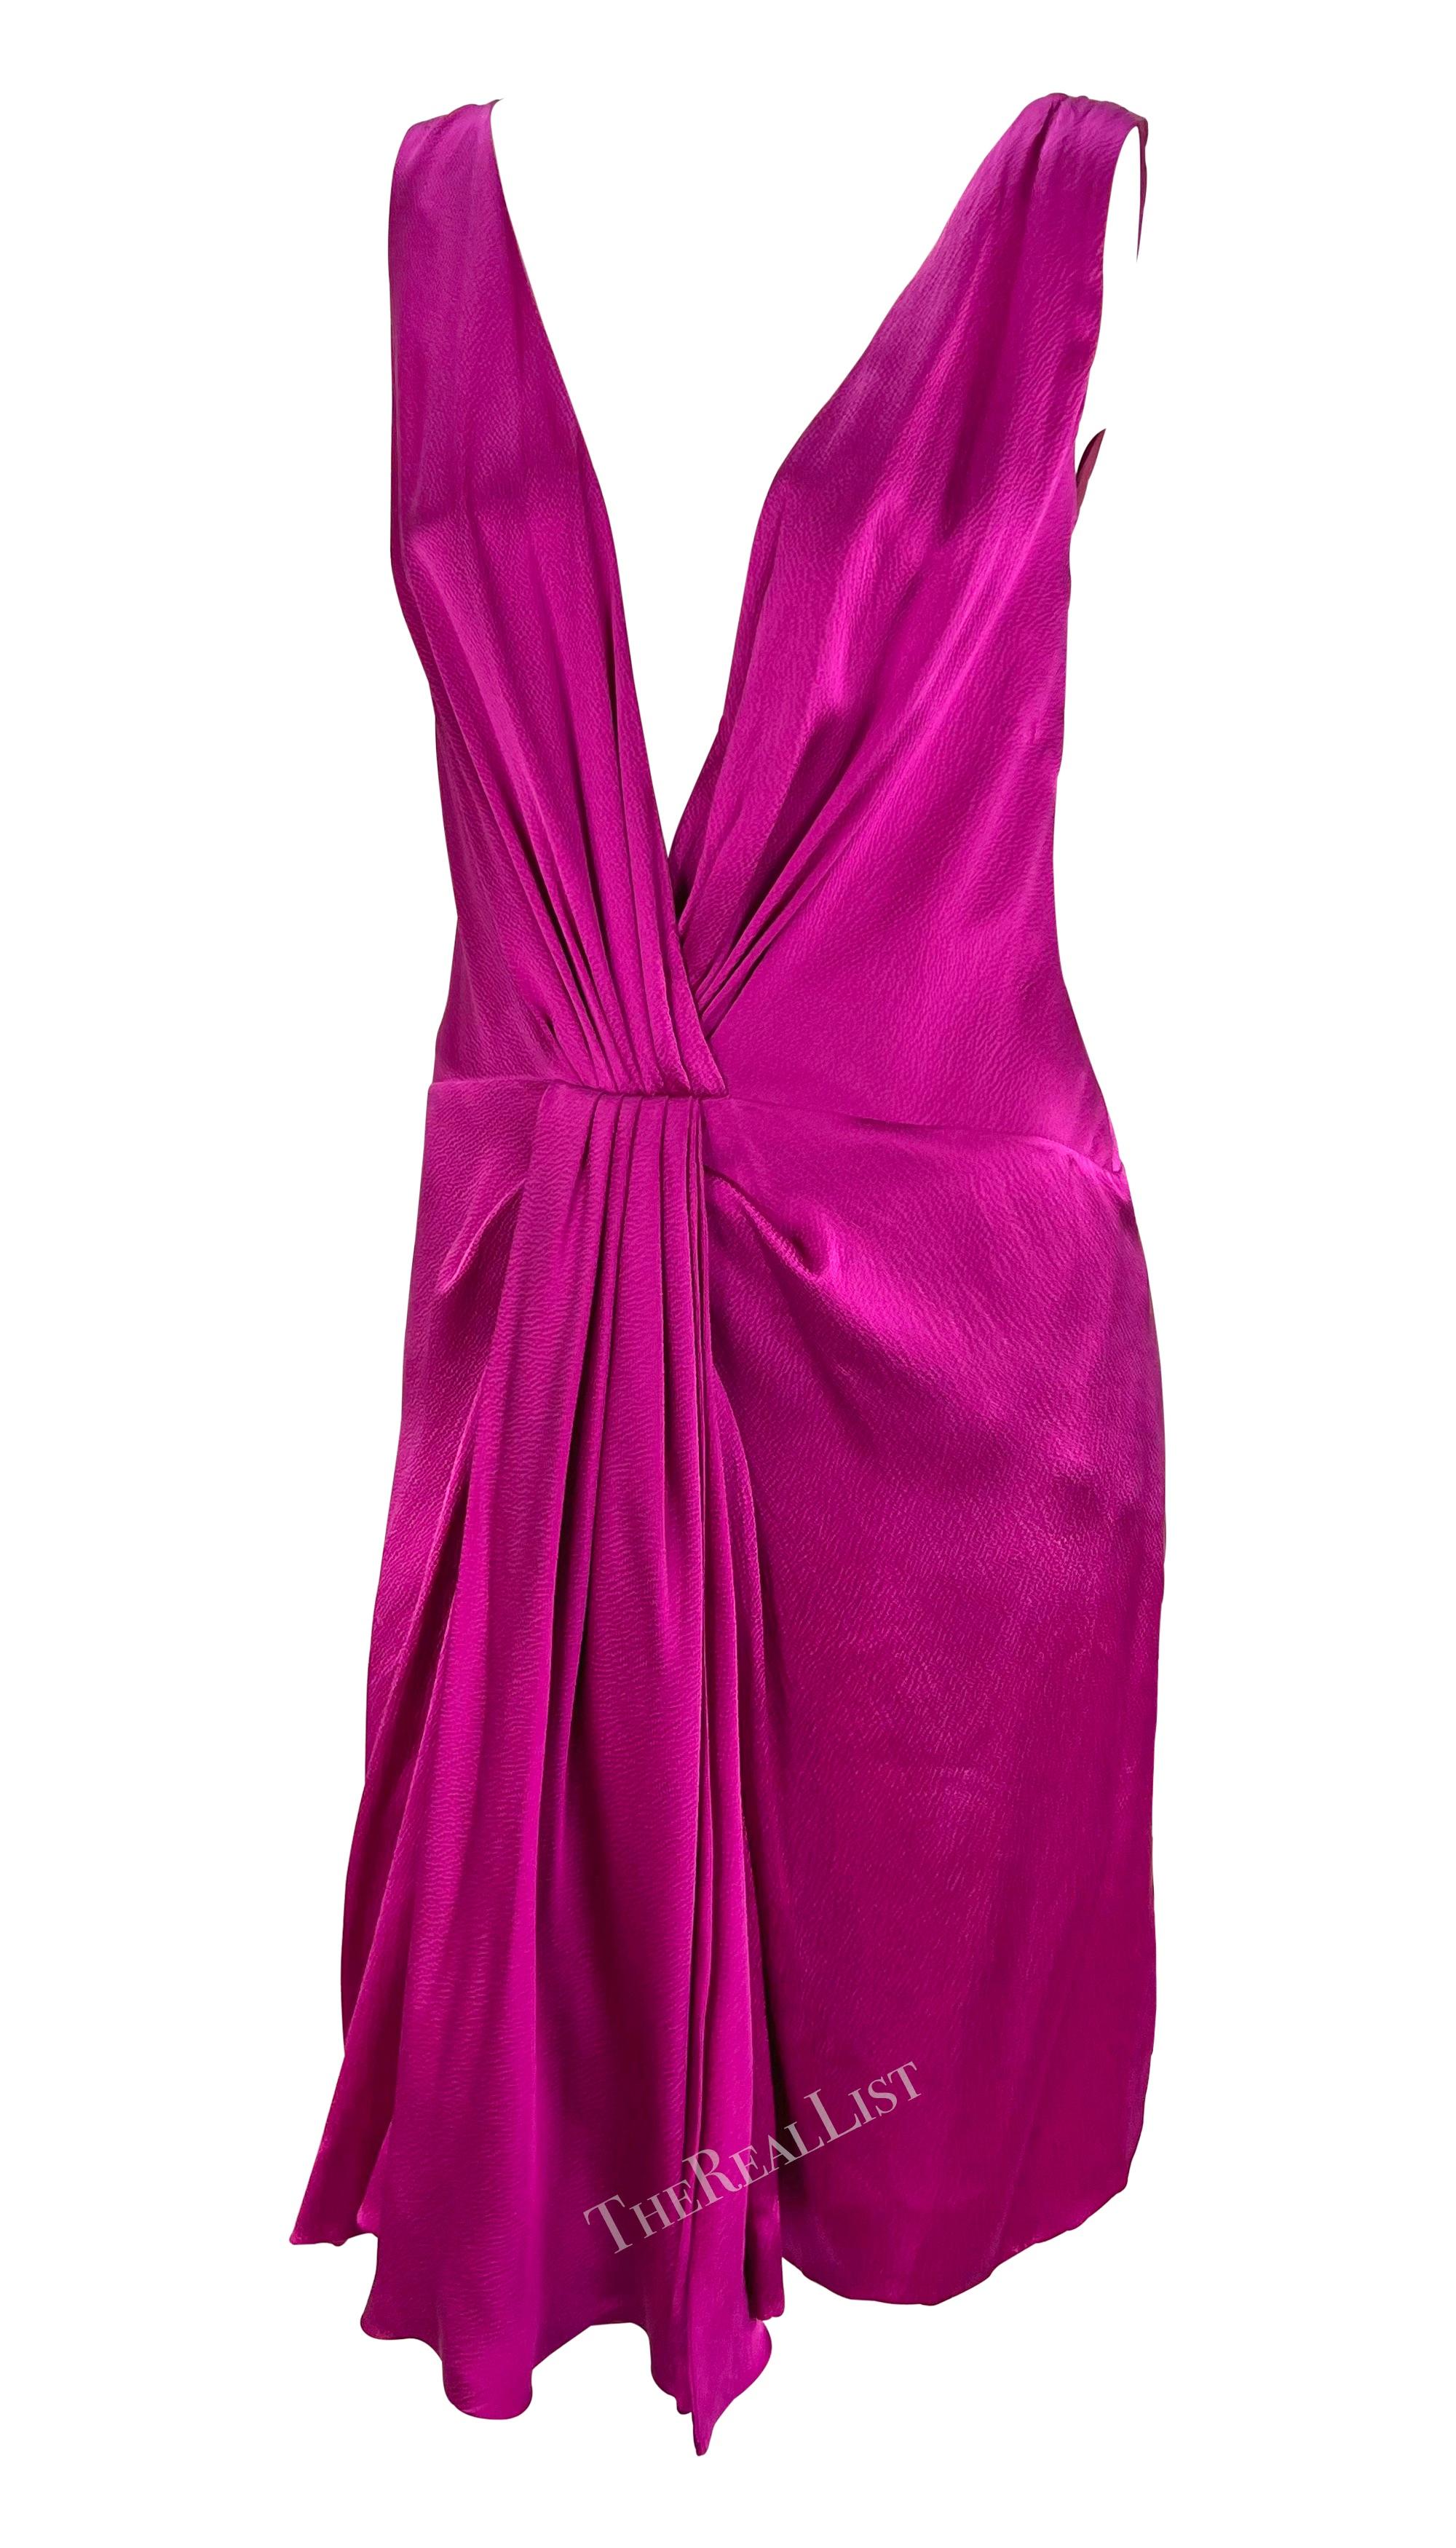 Introducing a stunning fuchsia strapless mini dress by Christian Dior, designed by John Galliano for the Fall/Winter 2007 collection. Crafted from crepe silk satin, this dress boasts an alluring plunging neckline. The strapless dress gathers at the